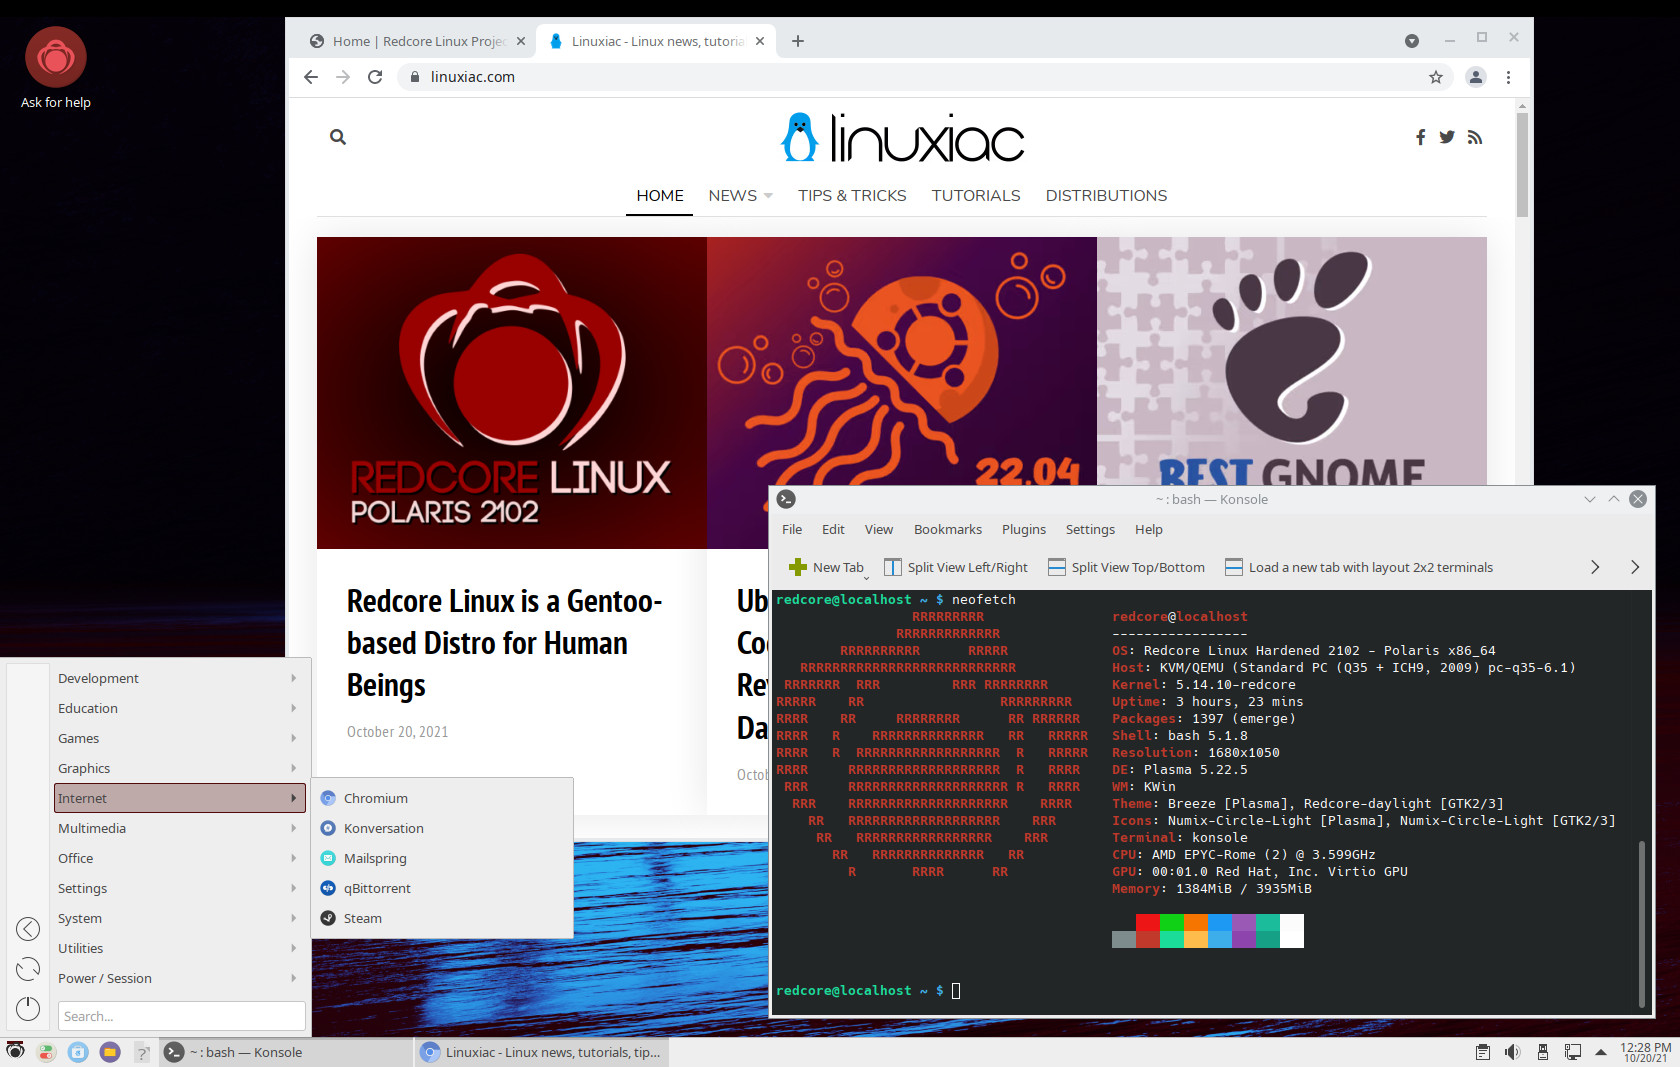 Redcore Linux is a Gentoo-based Distro for Human Beings